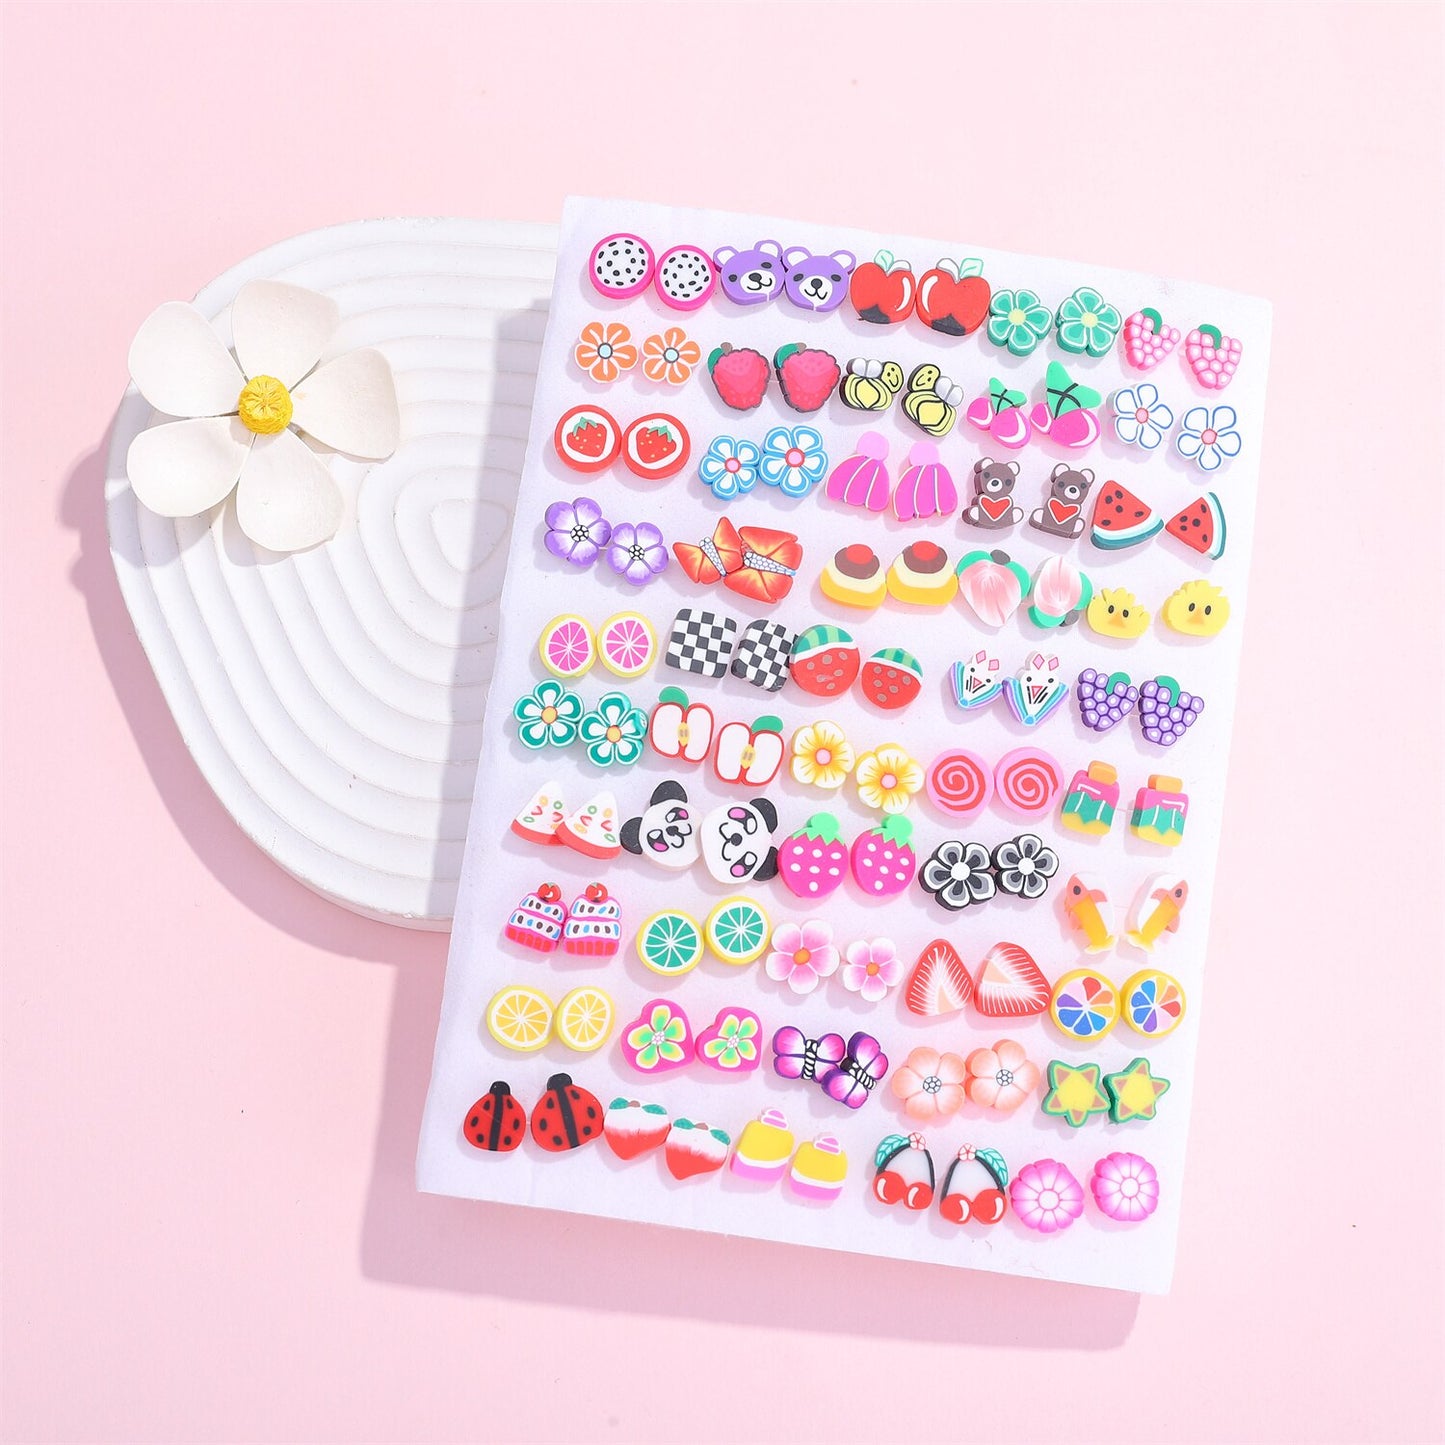 36 Pairs/lot Mix Small Stud Earrings for Women Girls Acrylic Crystal Heart Star Flower Insect Fruit Animal Earring Kids Jewelry